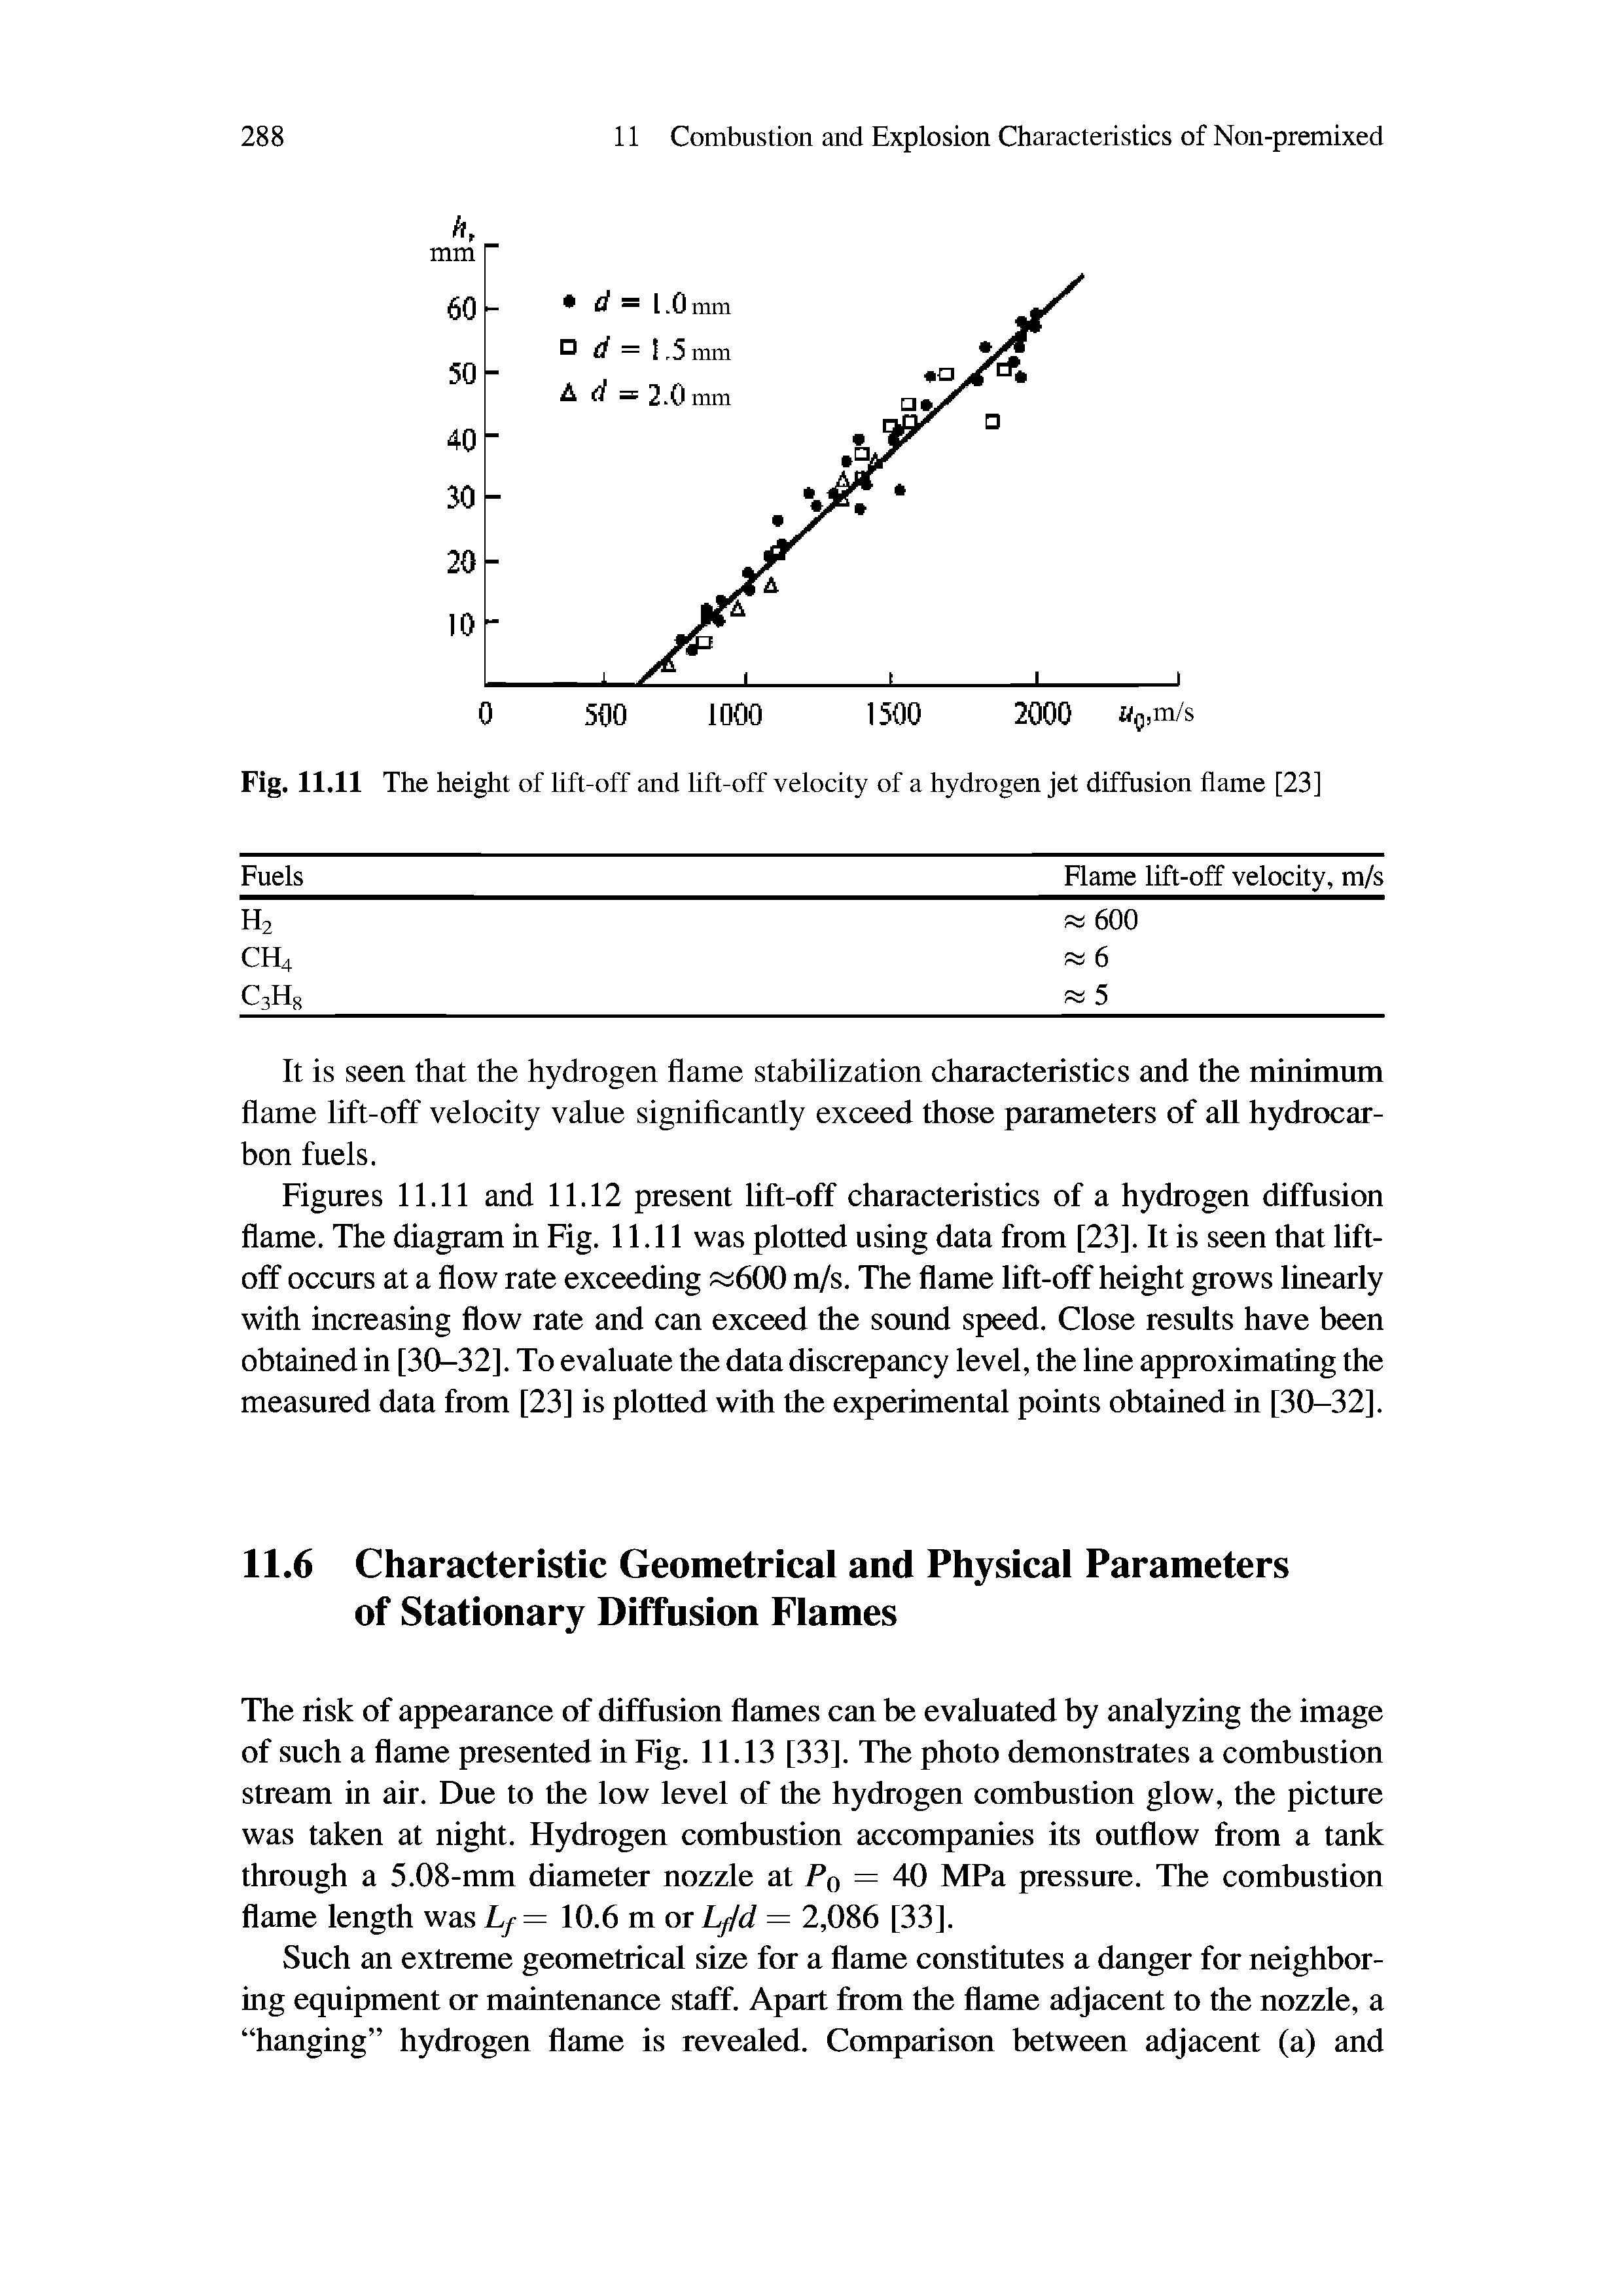 Figures 11.11 and 11.12 present Uft-off characteristics of a hydrogen diffusion flame. The diagram in Fig. 11.11 was plotted using data from [23]. It is seen that liftoff occurs at a flow rate exceeding 600 m/s. The flame lift-off height grows linearly with increasing flow rate and can exceed the sound speed. Close results have been obtained in [30-32]. To evaluate the data discrepancy level, the line approximating the measured data from [23] is plotted with the experimental points obtained in [30-32].